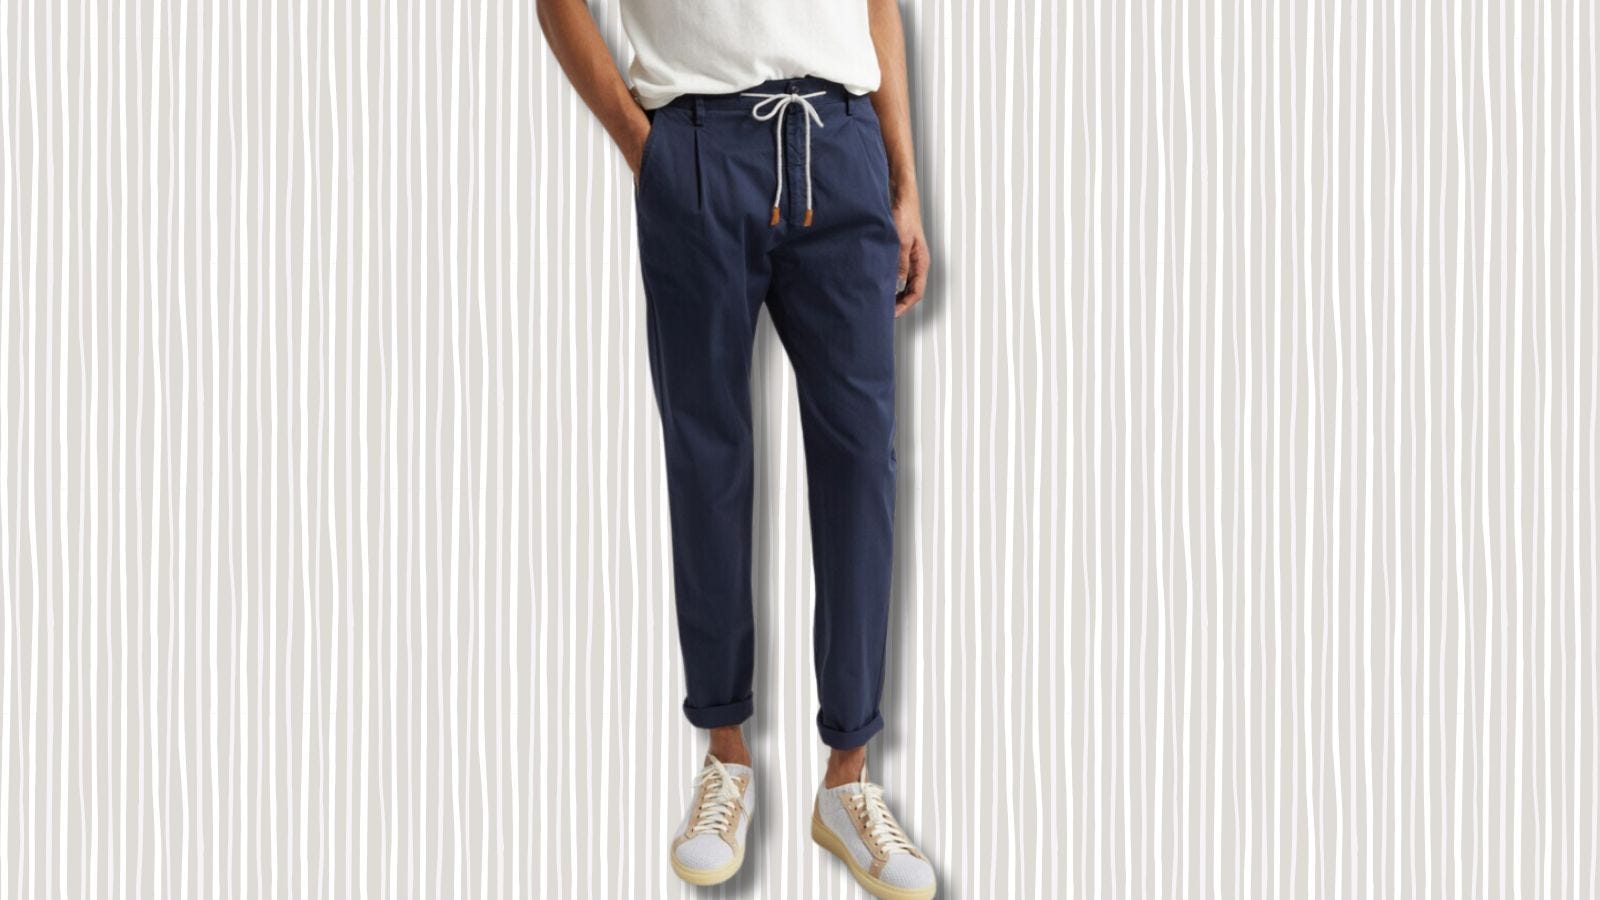 image of a man from the waist down in navy drawstring pants and sneakers